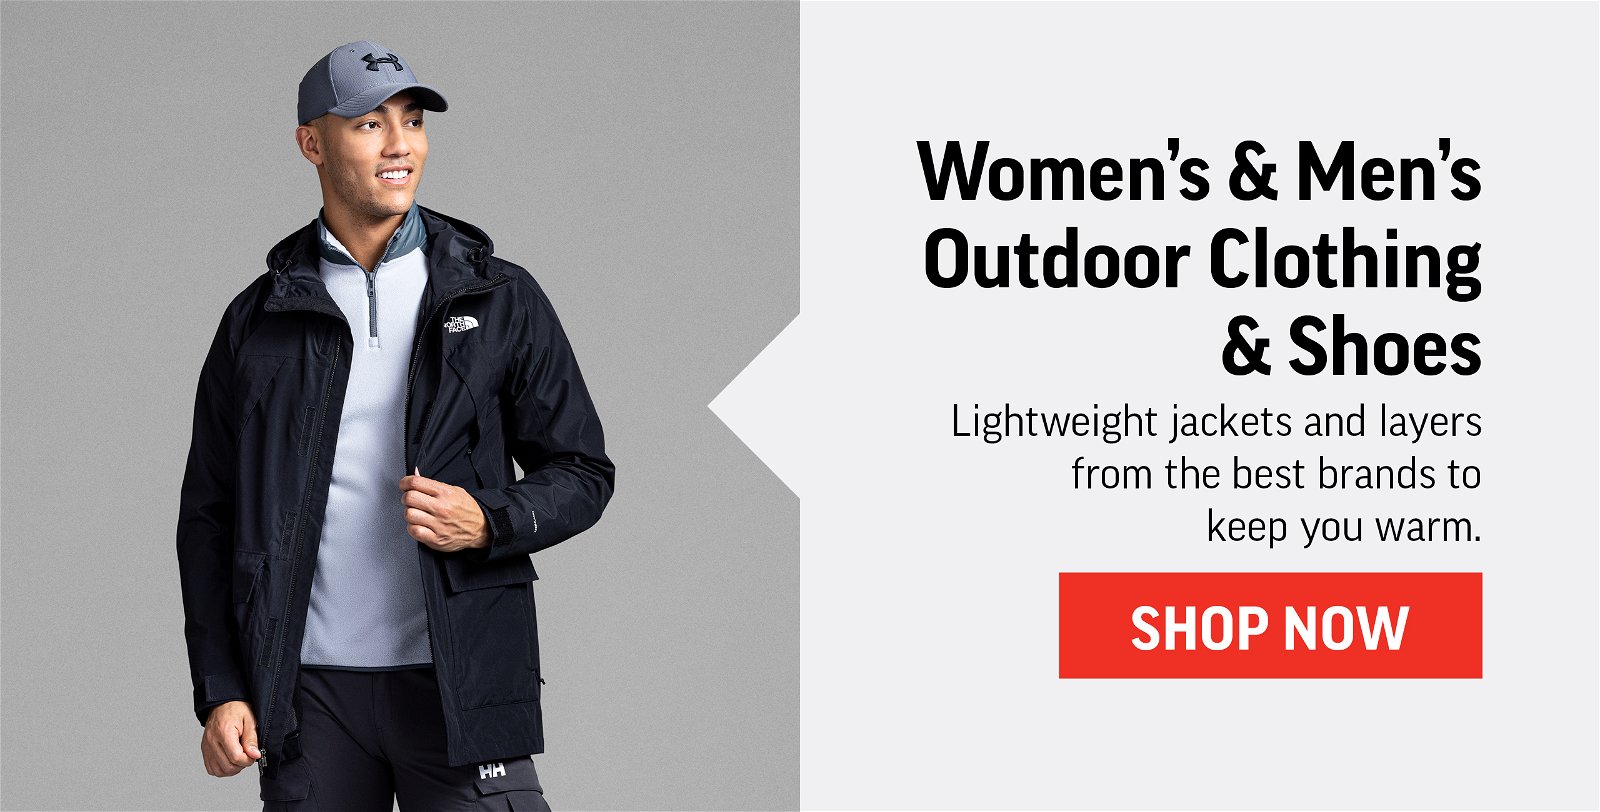 OUTDOOR CLOTHING & SHOES